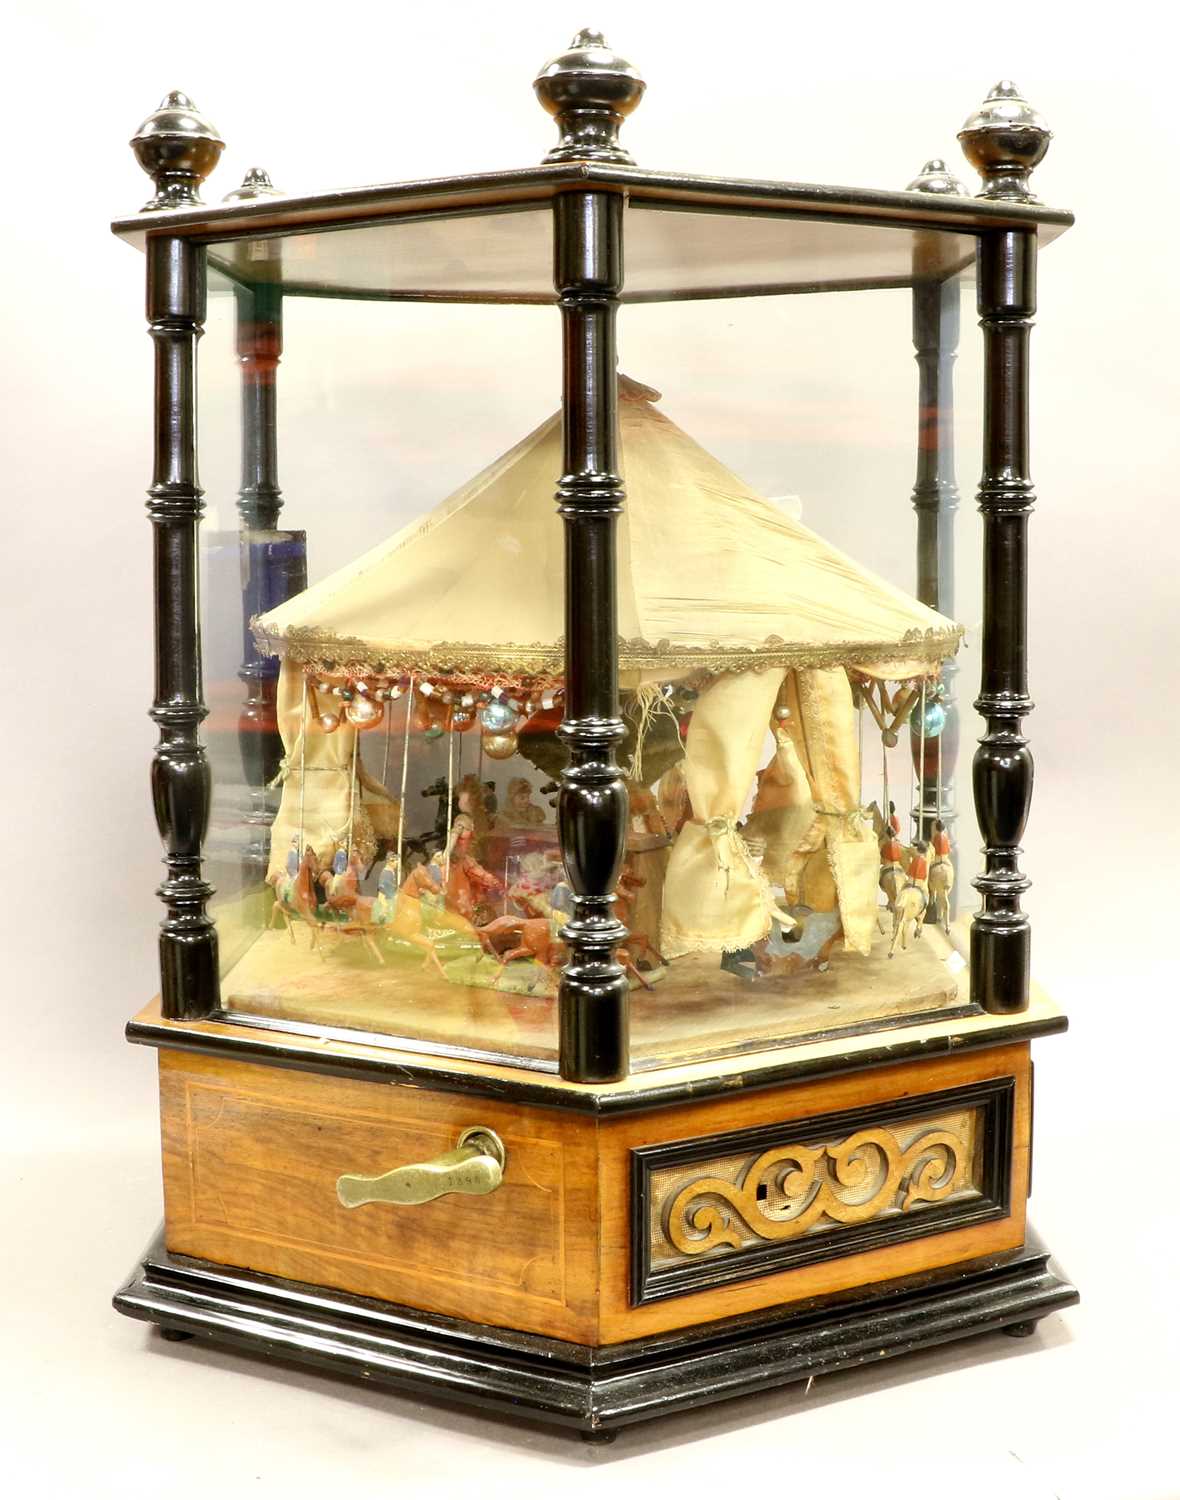 Lot 59 - A Fine And Rare Coin-Operated Carousel Musical Automaton, Almost Certainly By Bornand Frères